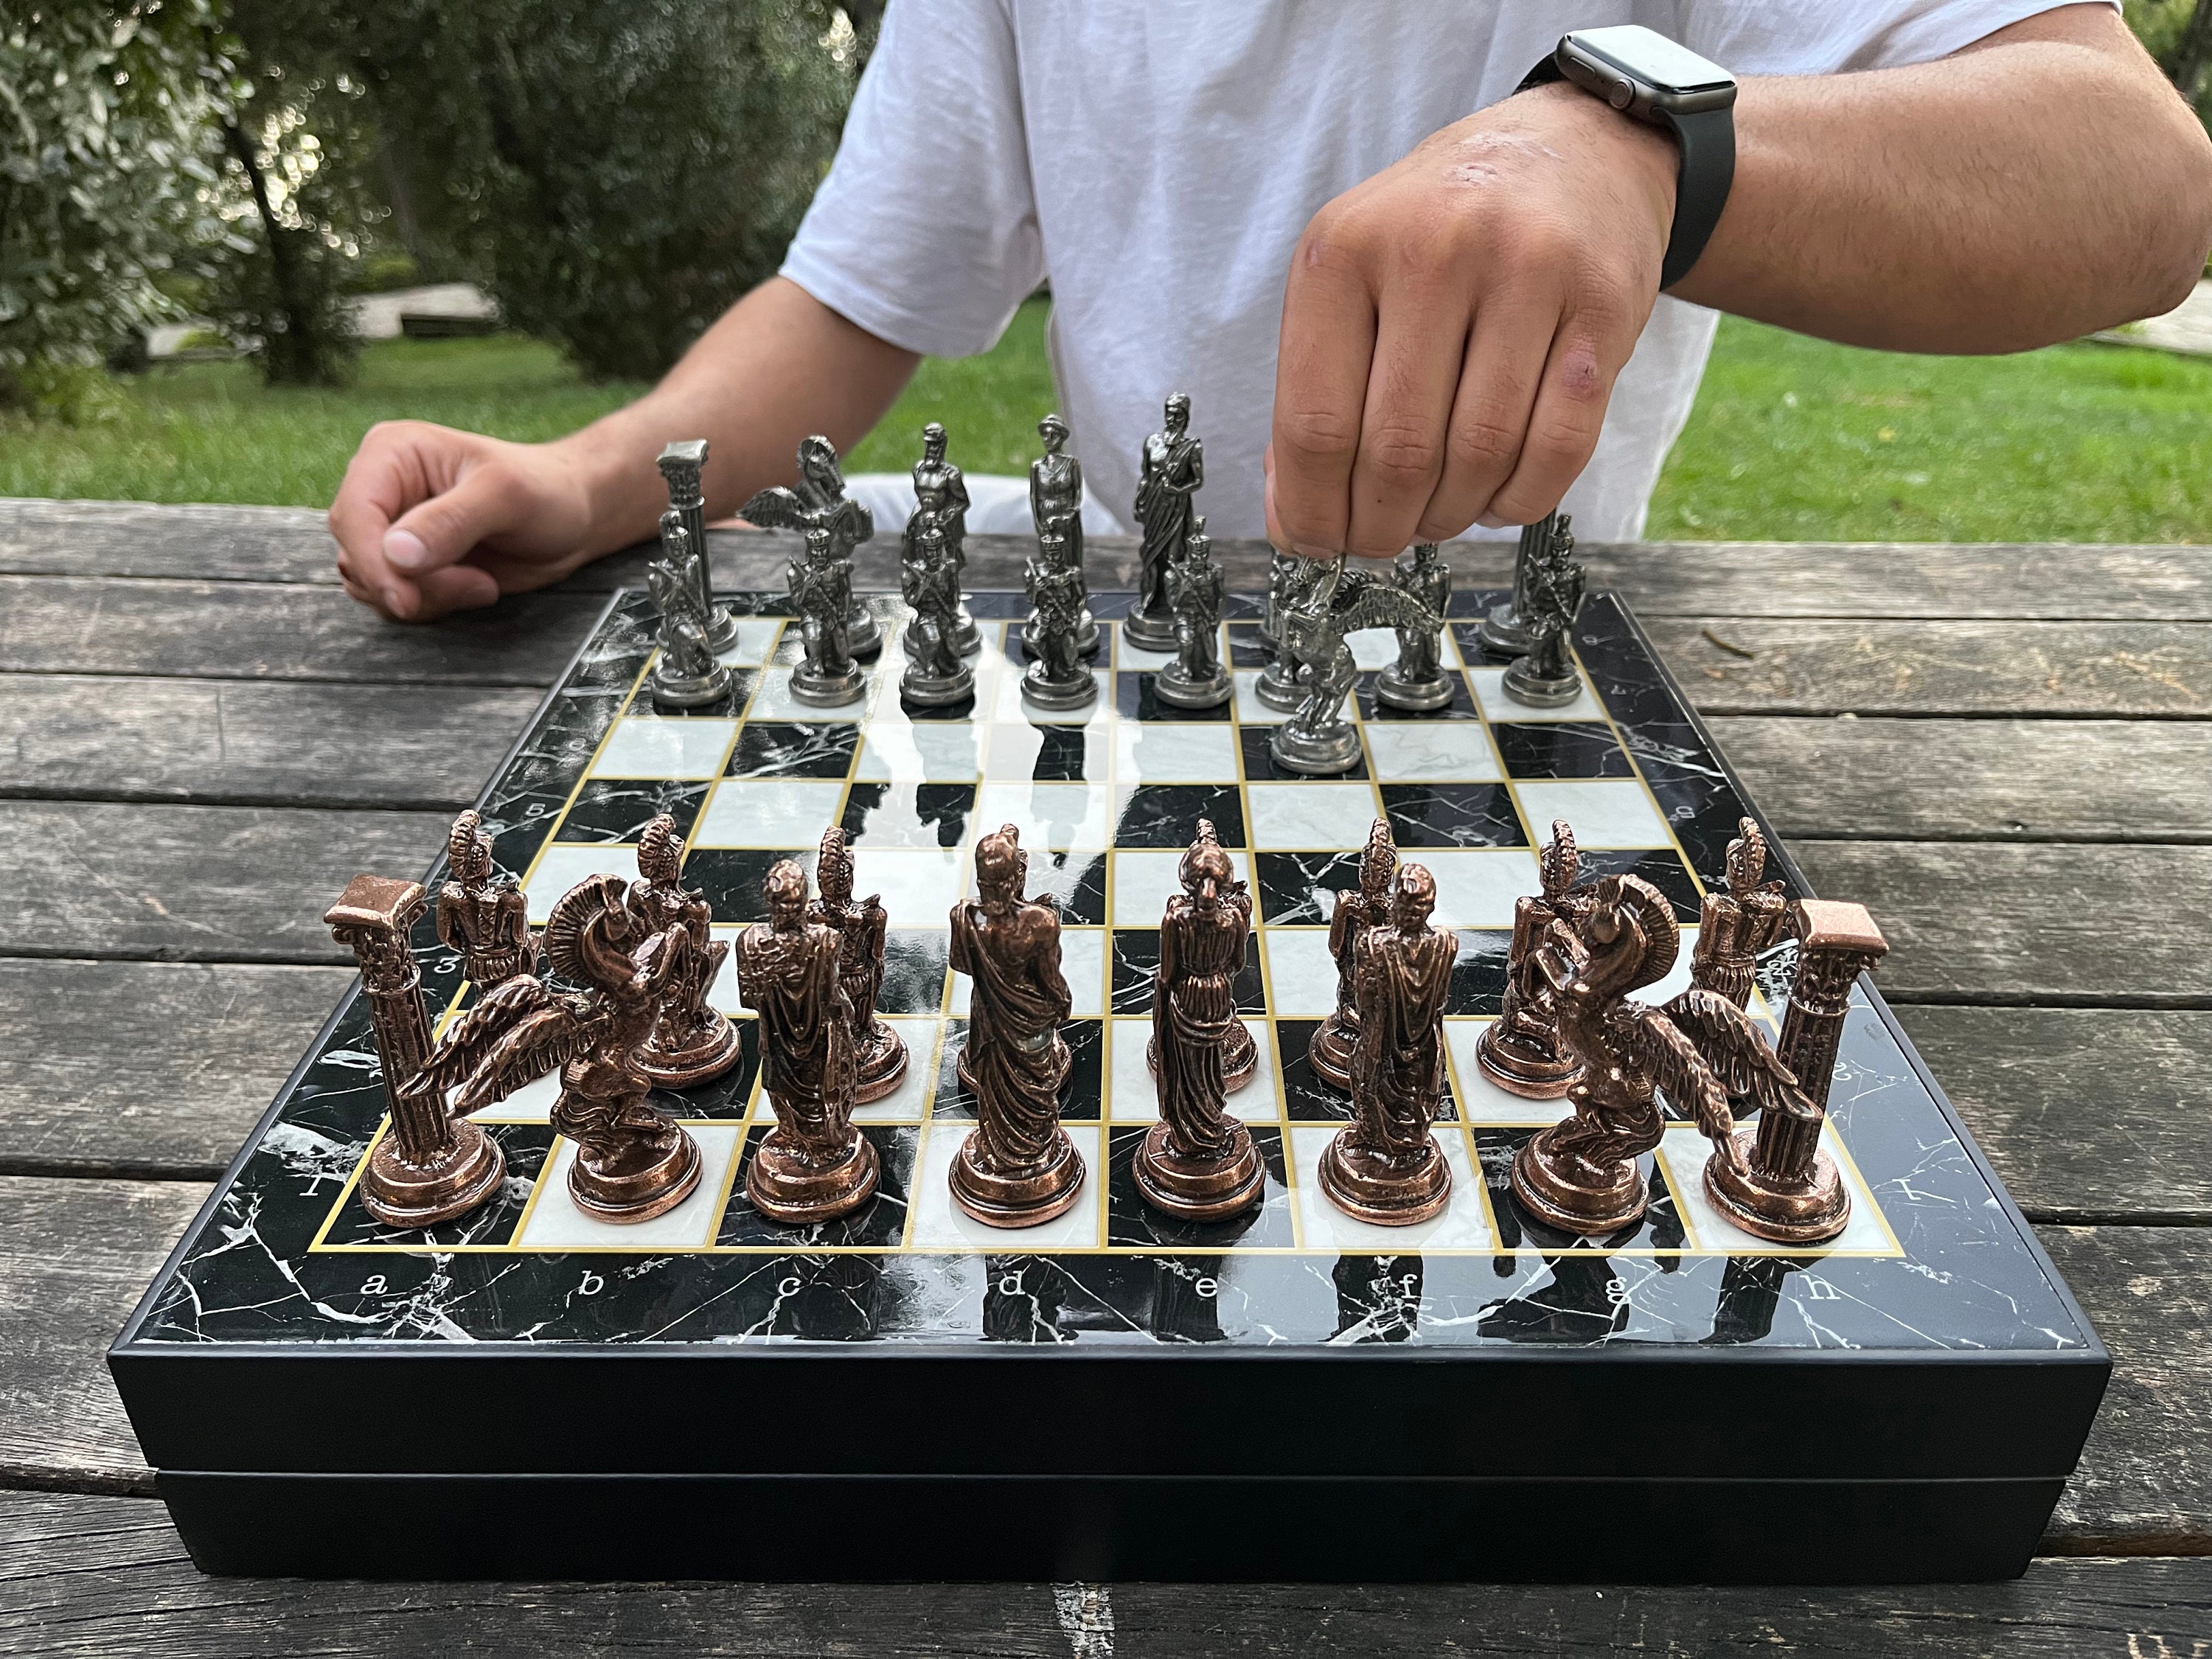 Deluxe Chess - 32 metal pieces